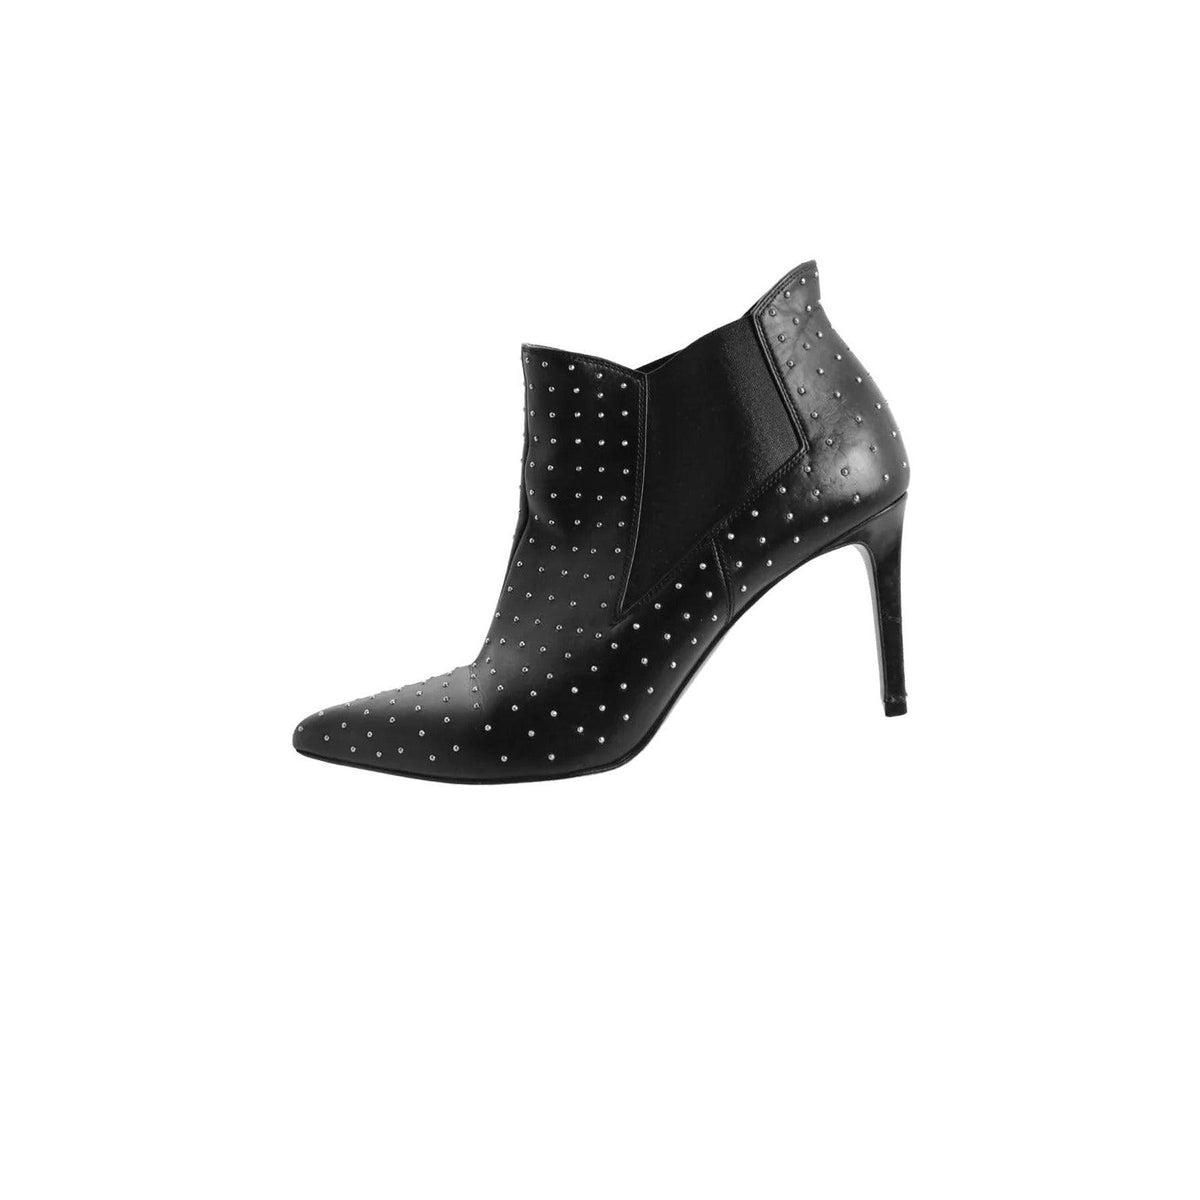 Pre-owned SAINT LAURENT Black Leather Pointed Toe Booties |  Size EU 39.5 - US 8.5 - theREMODA